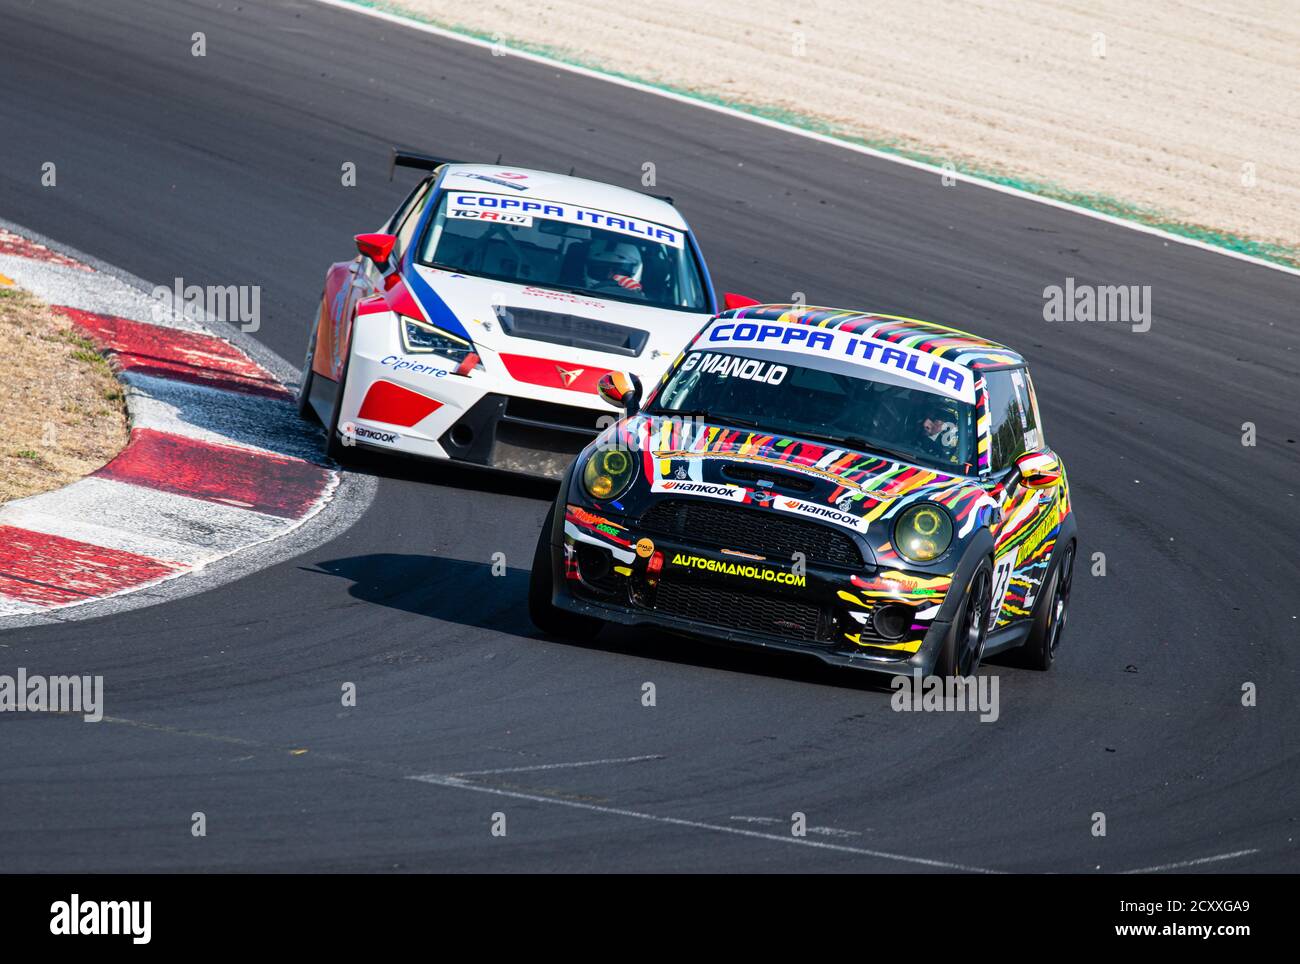 Vallelunga, Rome, Italy, 11 september 2020. TCR Championship. Racing cars  challenging in overtaking battle at motorsport circuit turn Stock Photo